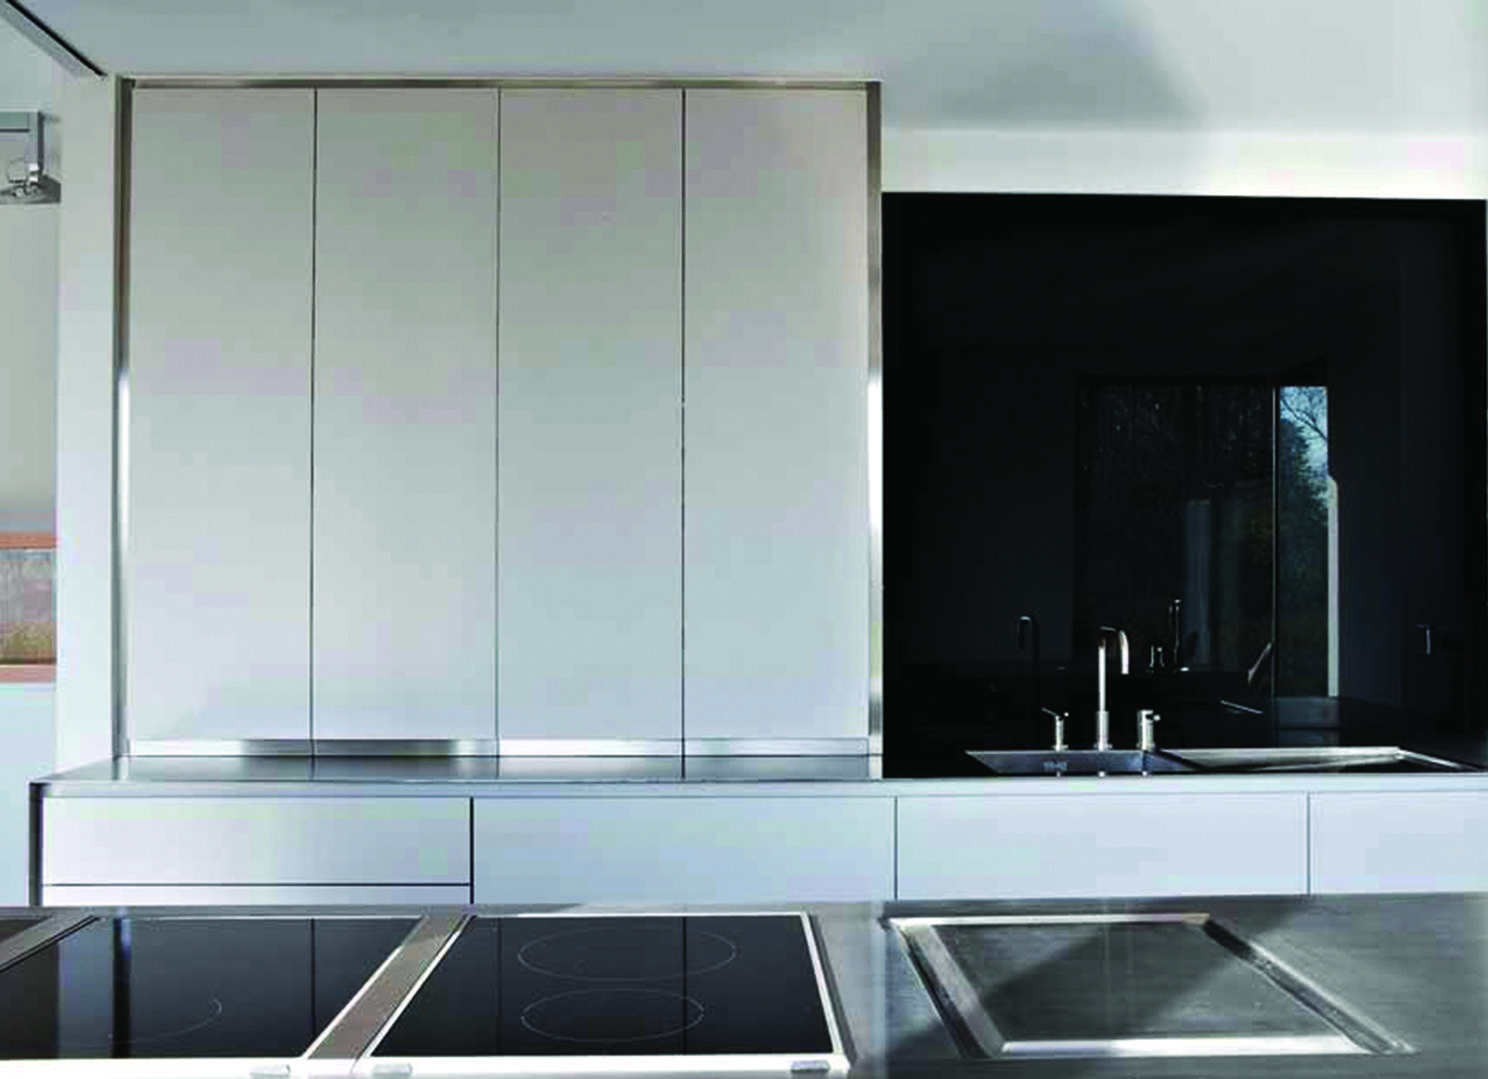 Strato_design_Non Plus Ultra_bespoke kitchen project in Belgium_stratocolor white_mat stainless steel_3